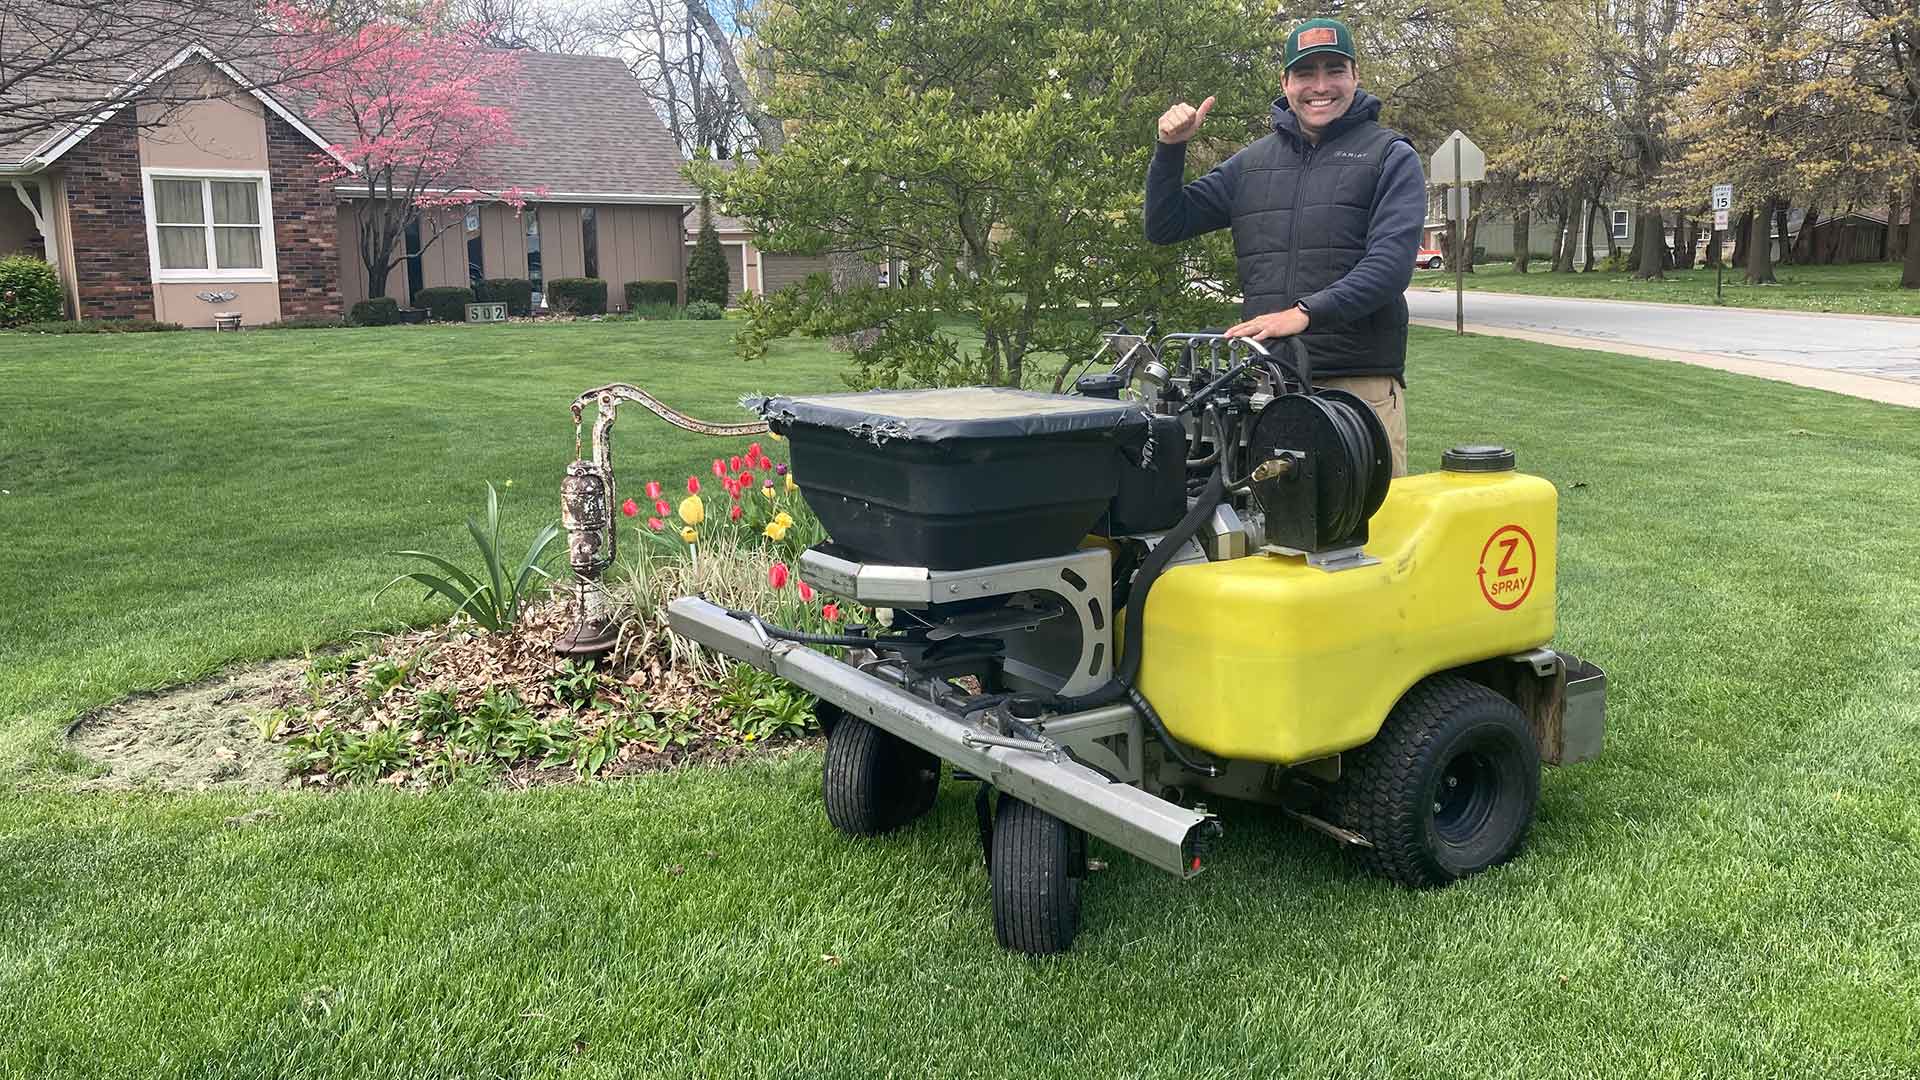 Lawn care equipment in use at a home near Kansas City, KS.